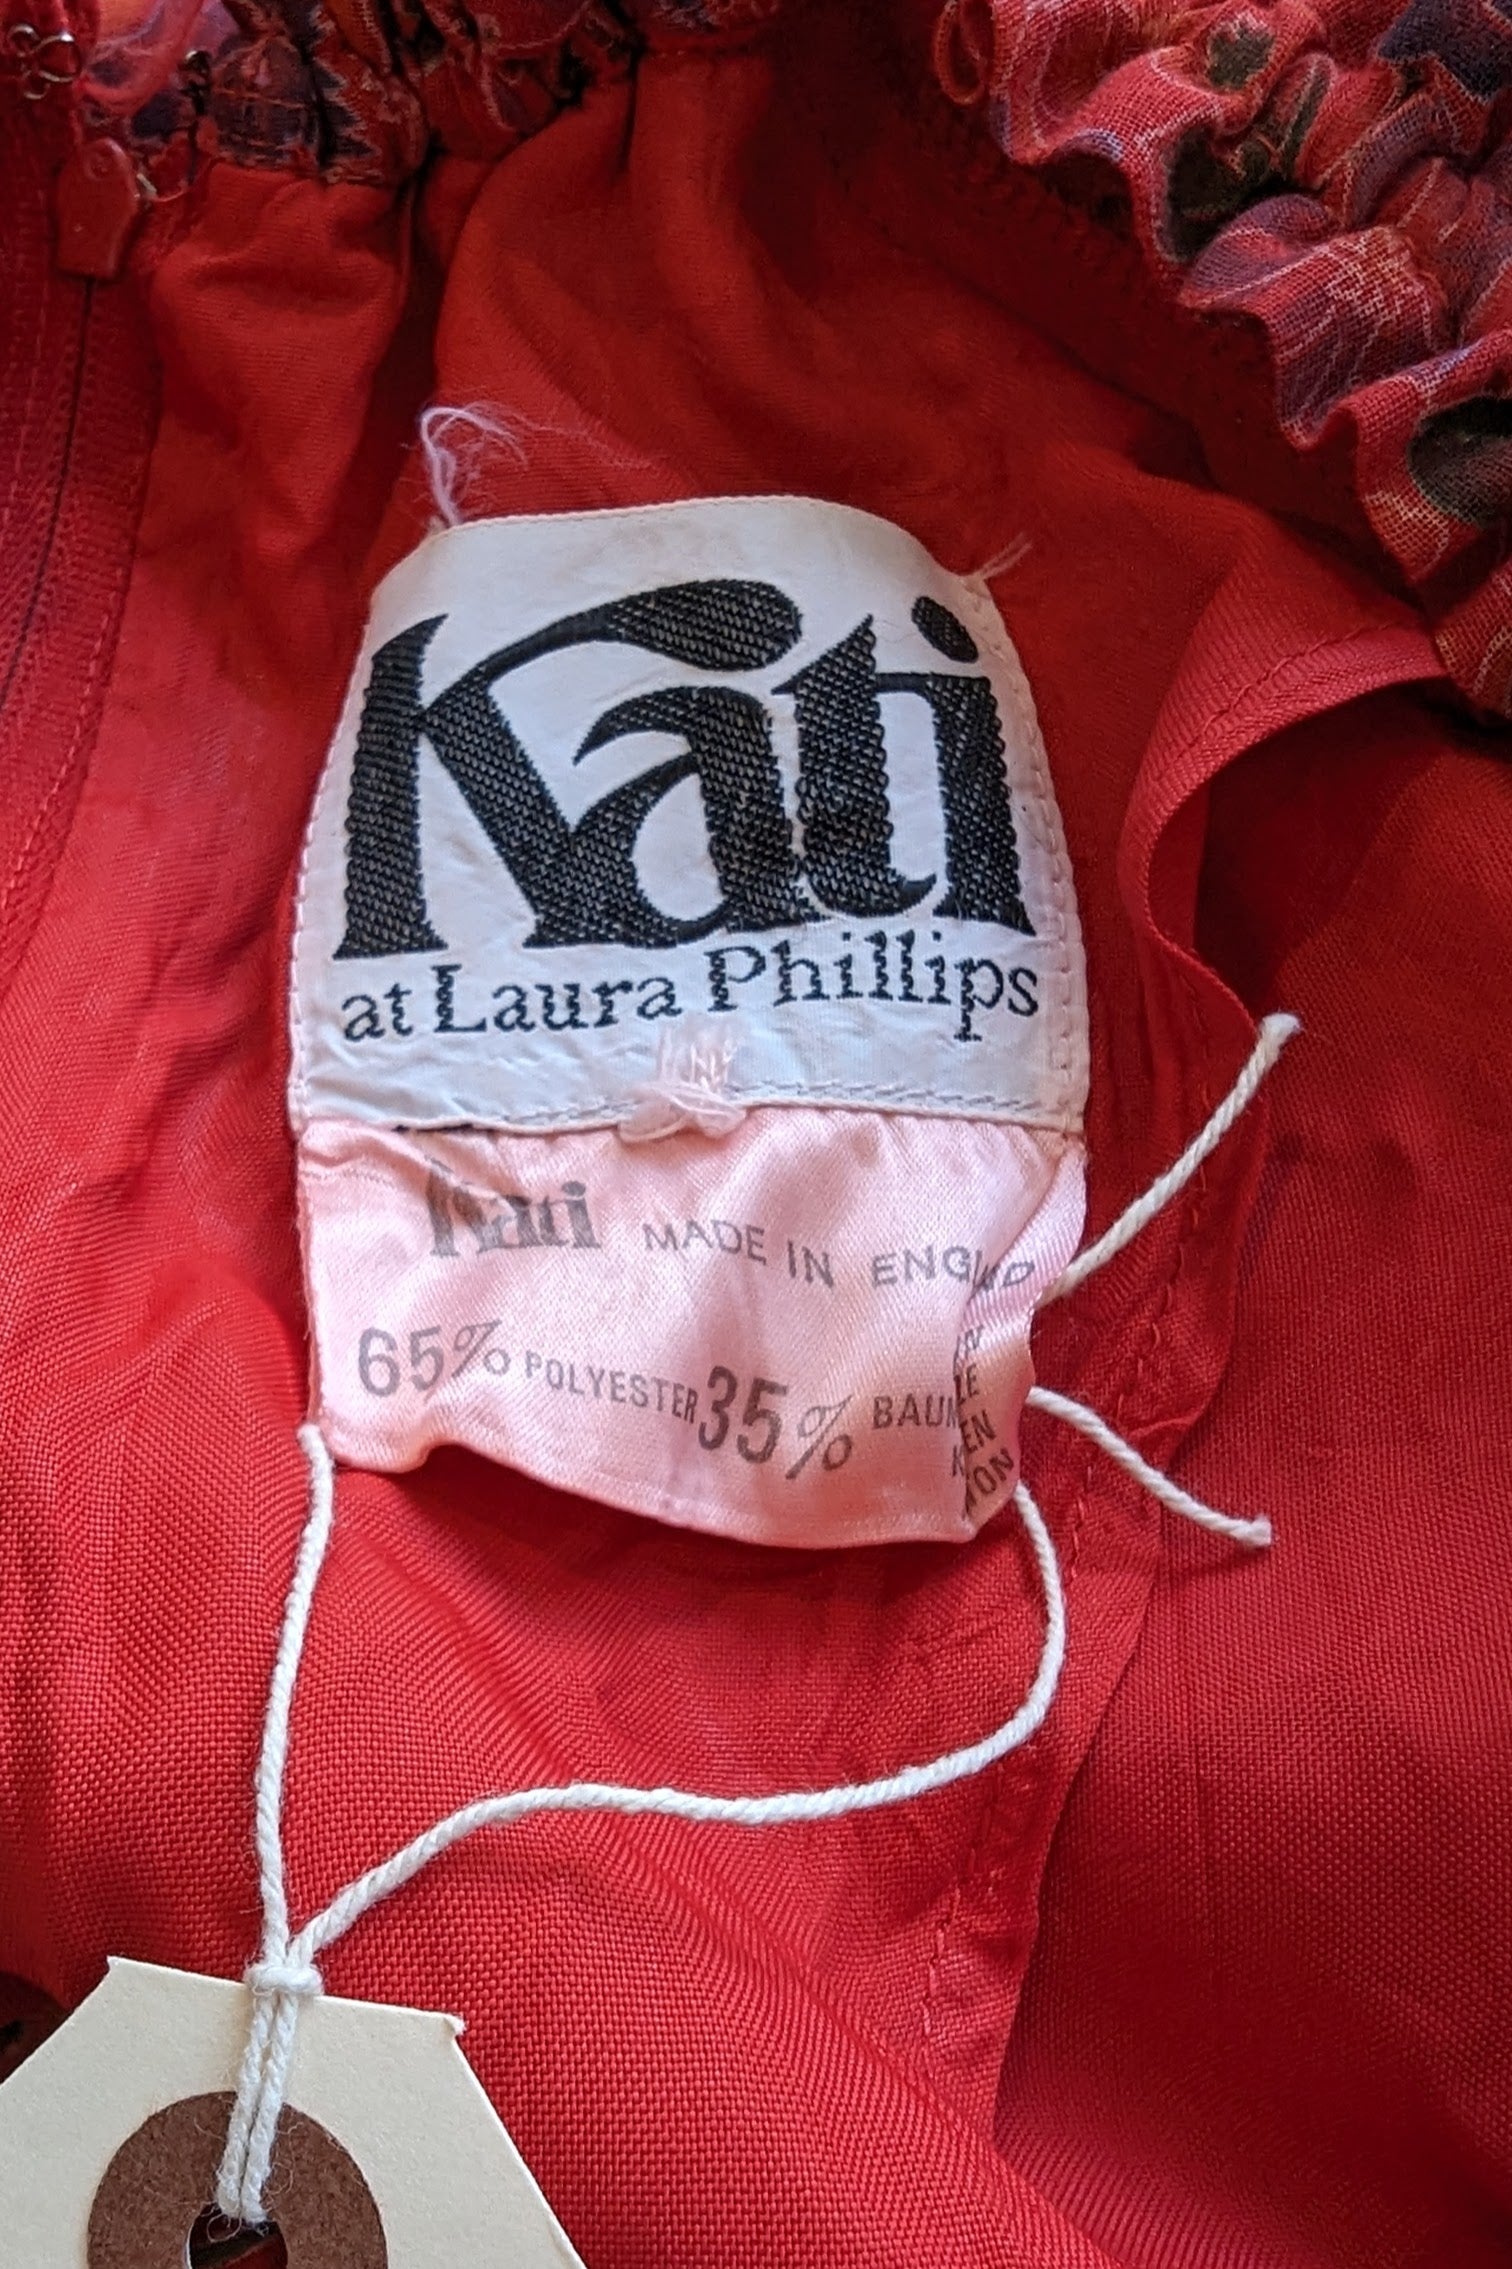 Kati at Laura Phillips Label on Red 70s Dress